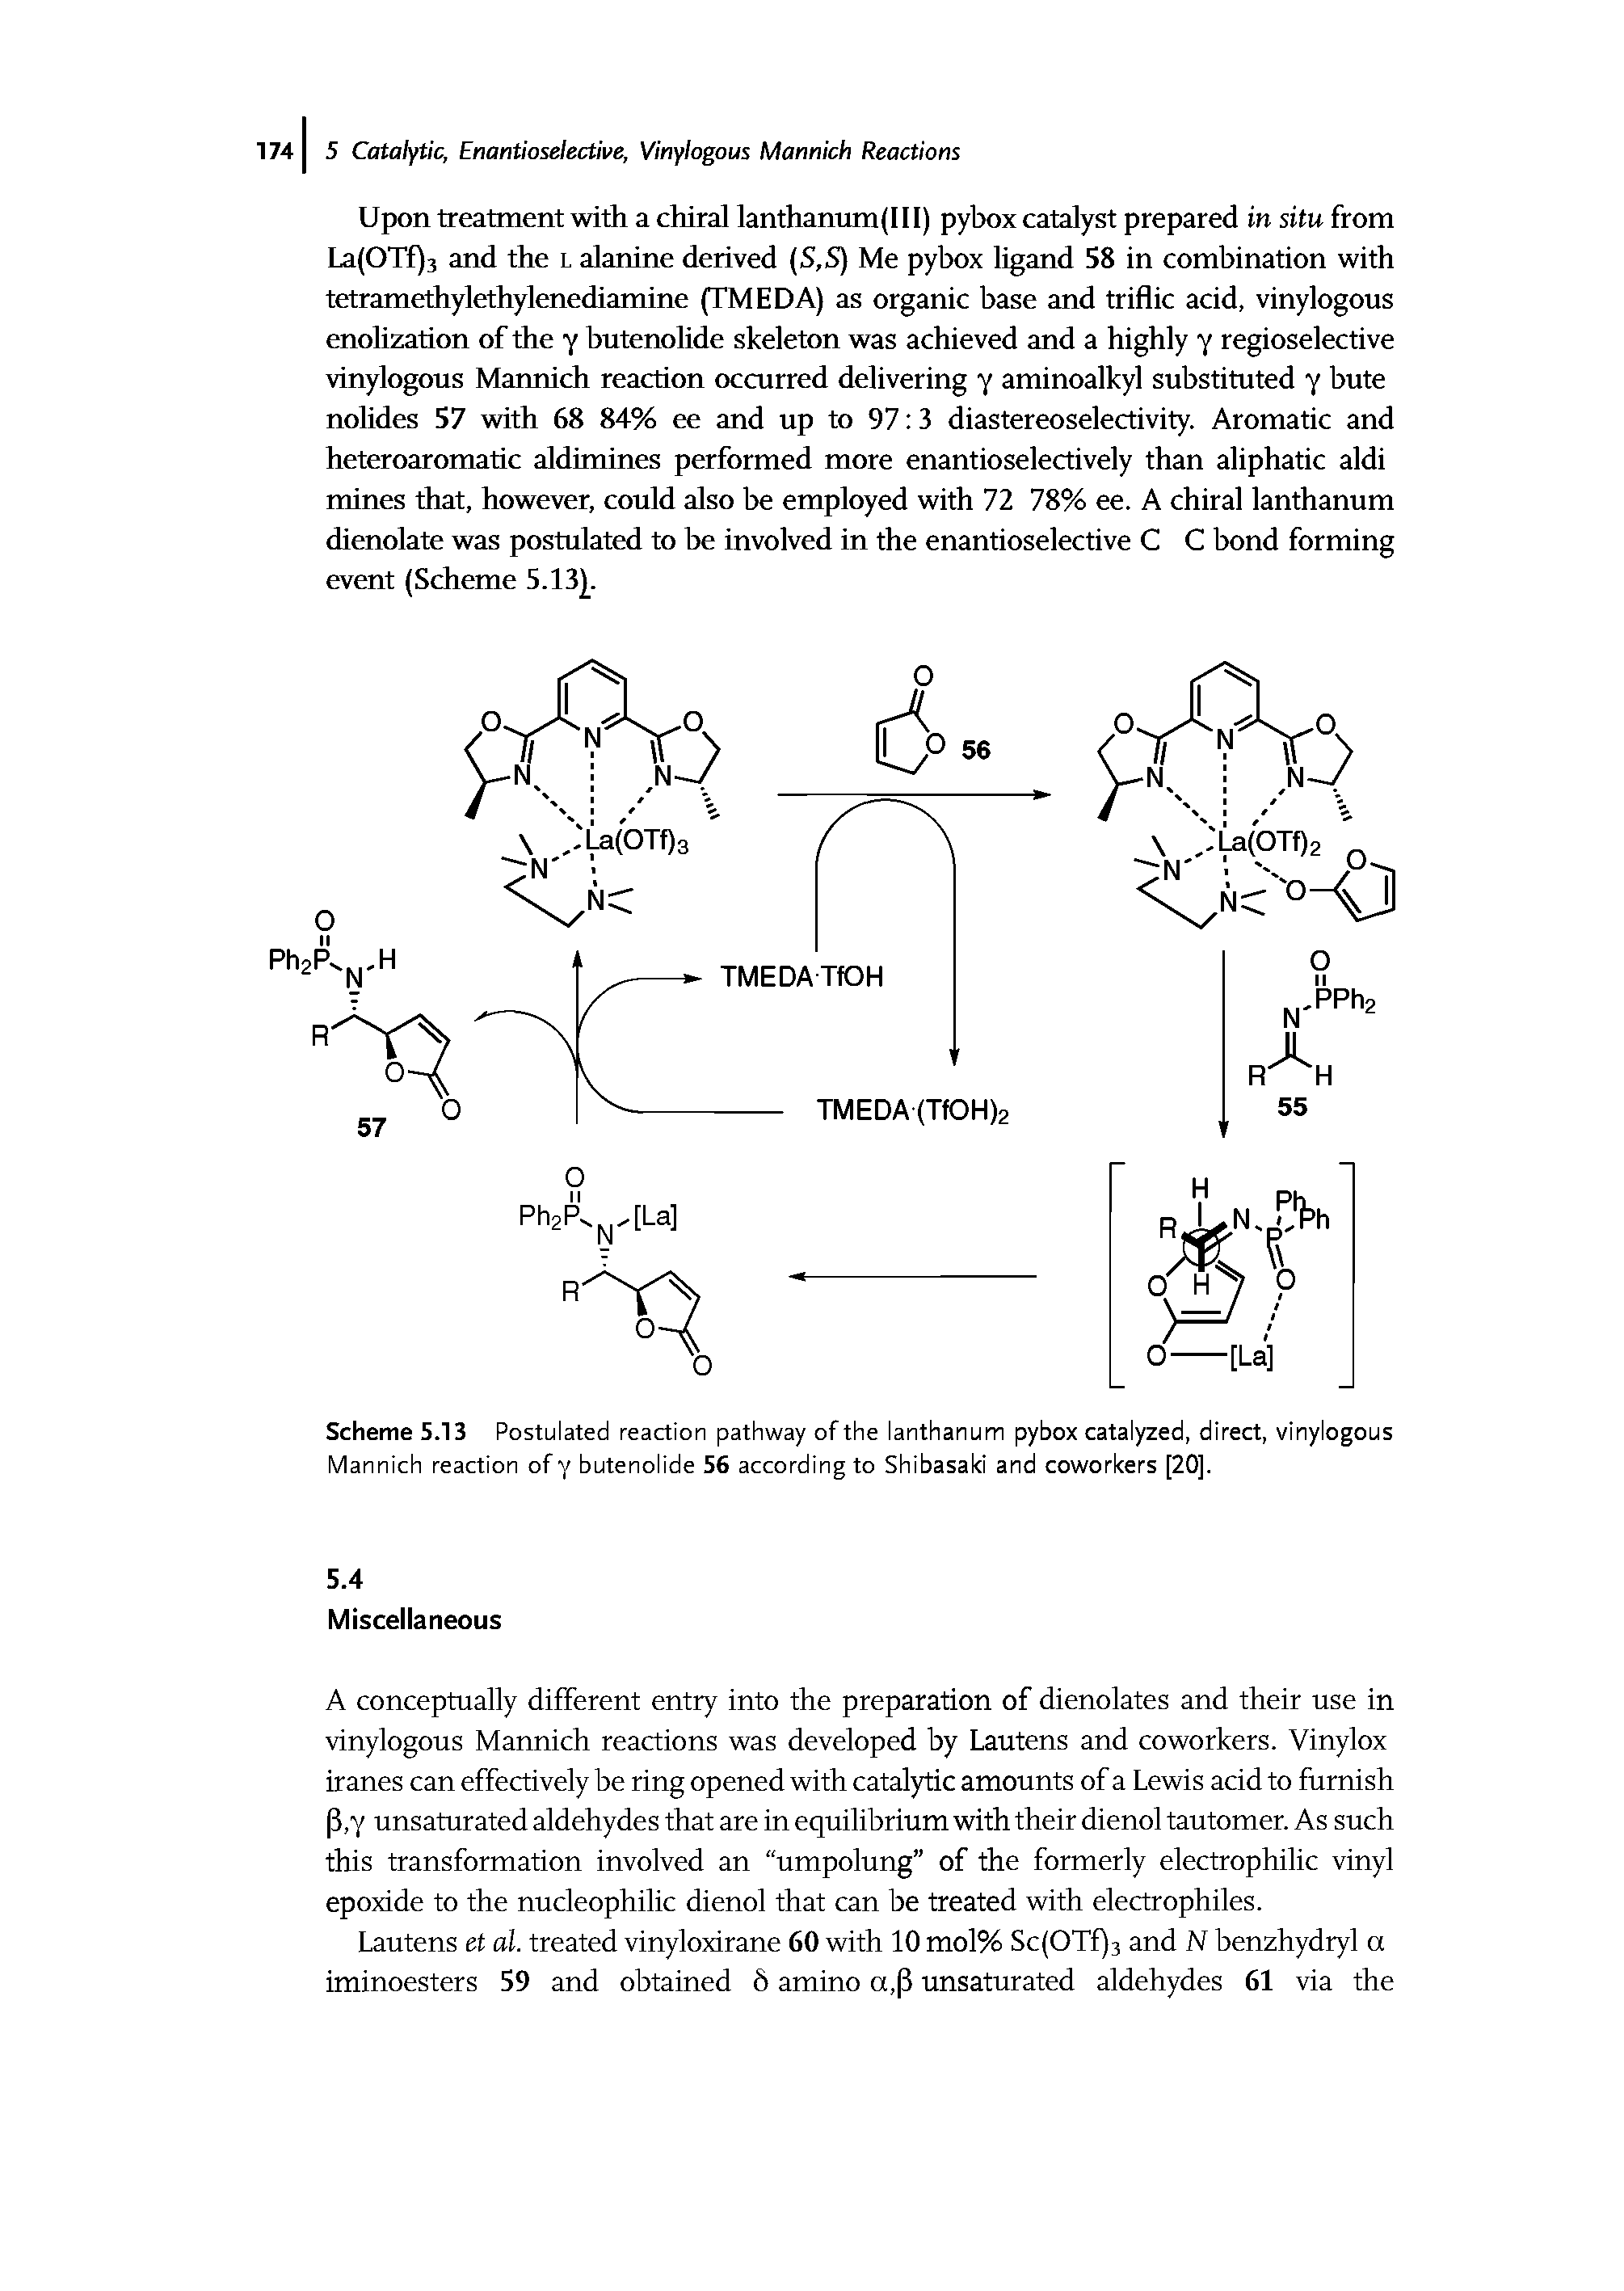 Scheme 5.13 Postulated reaction pathway of the lanthanum pybox catalyzed, direct, vinylogous Mannich reaction of y butenolide 56 according to Shibasaki and coworkers [20].